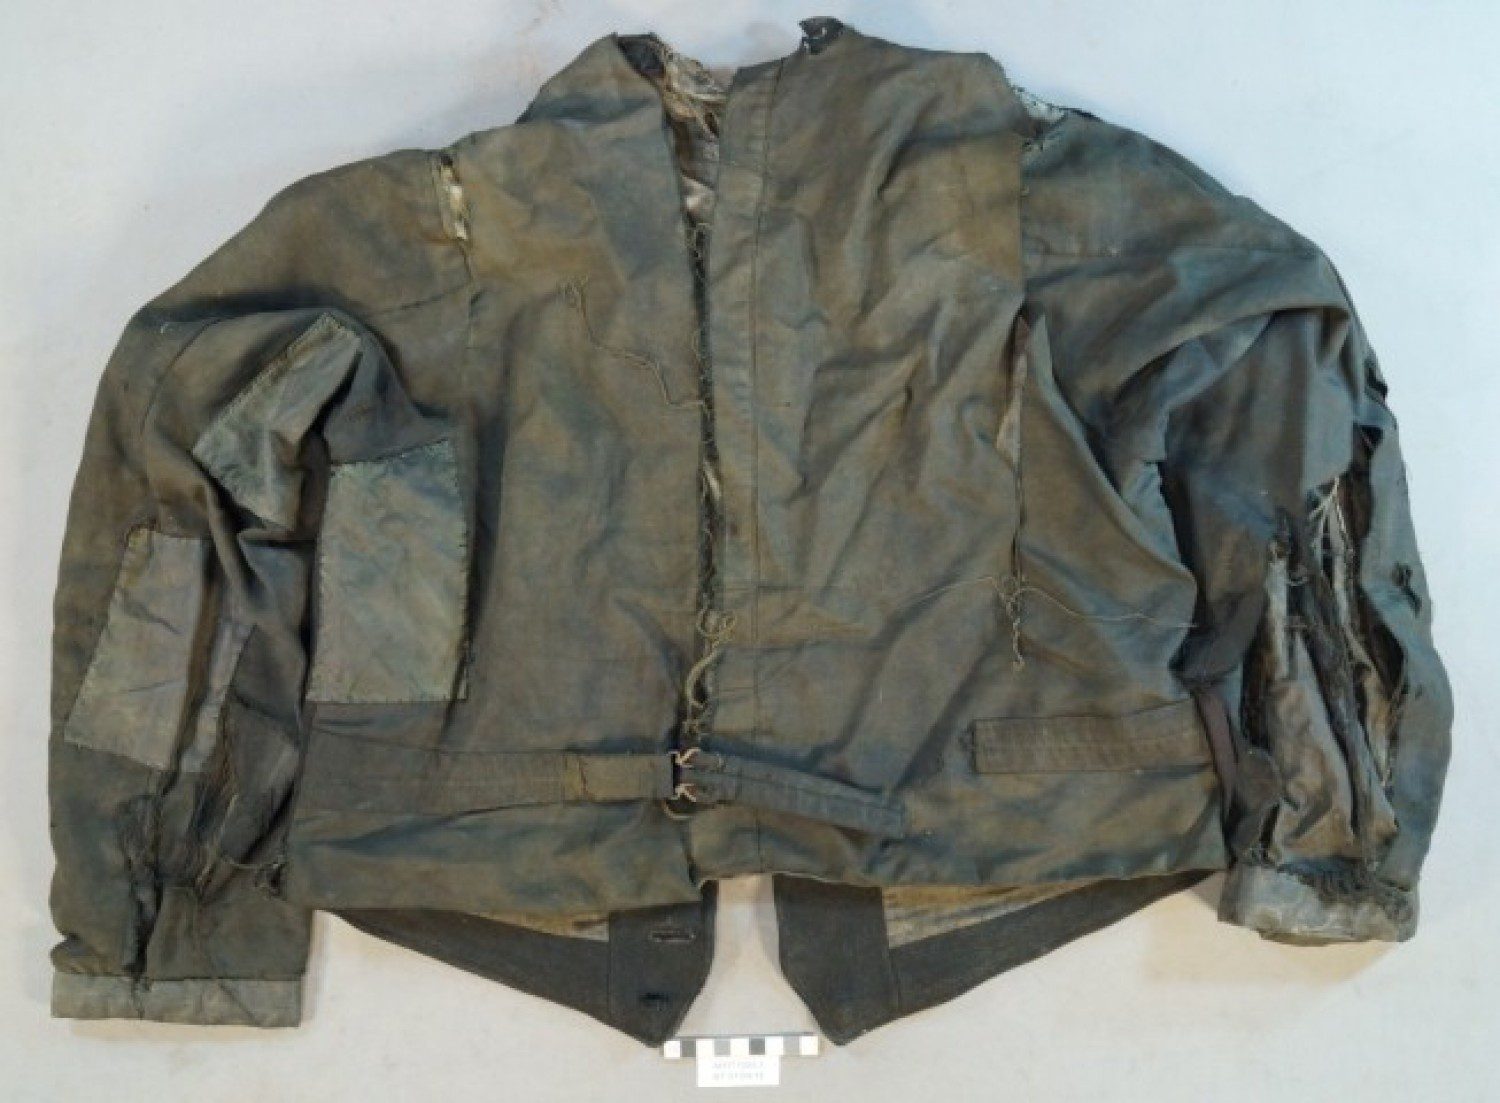 A makeshift jacket made by the Ross Sea Party members